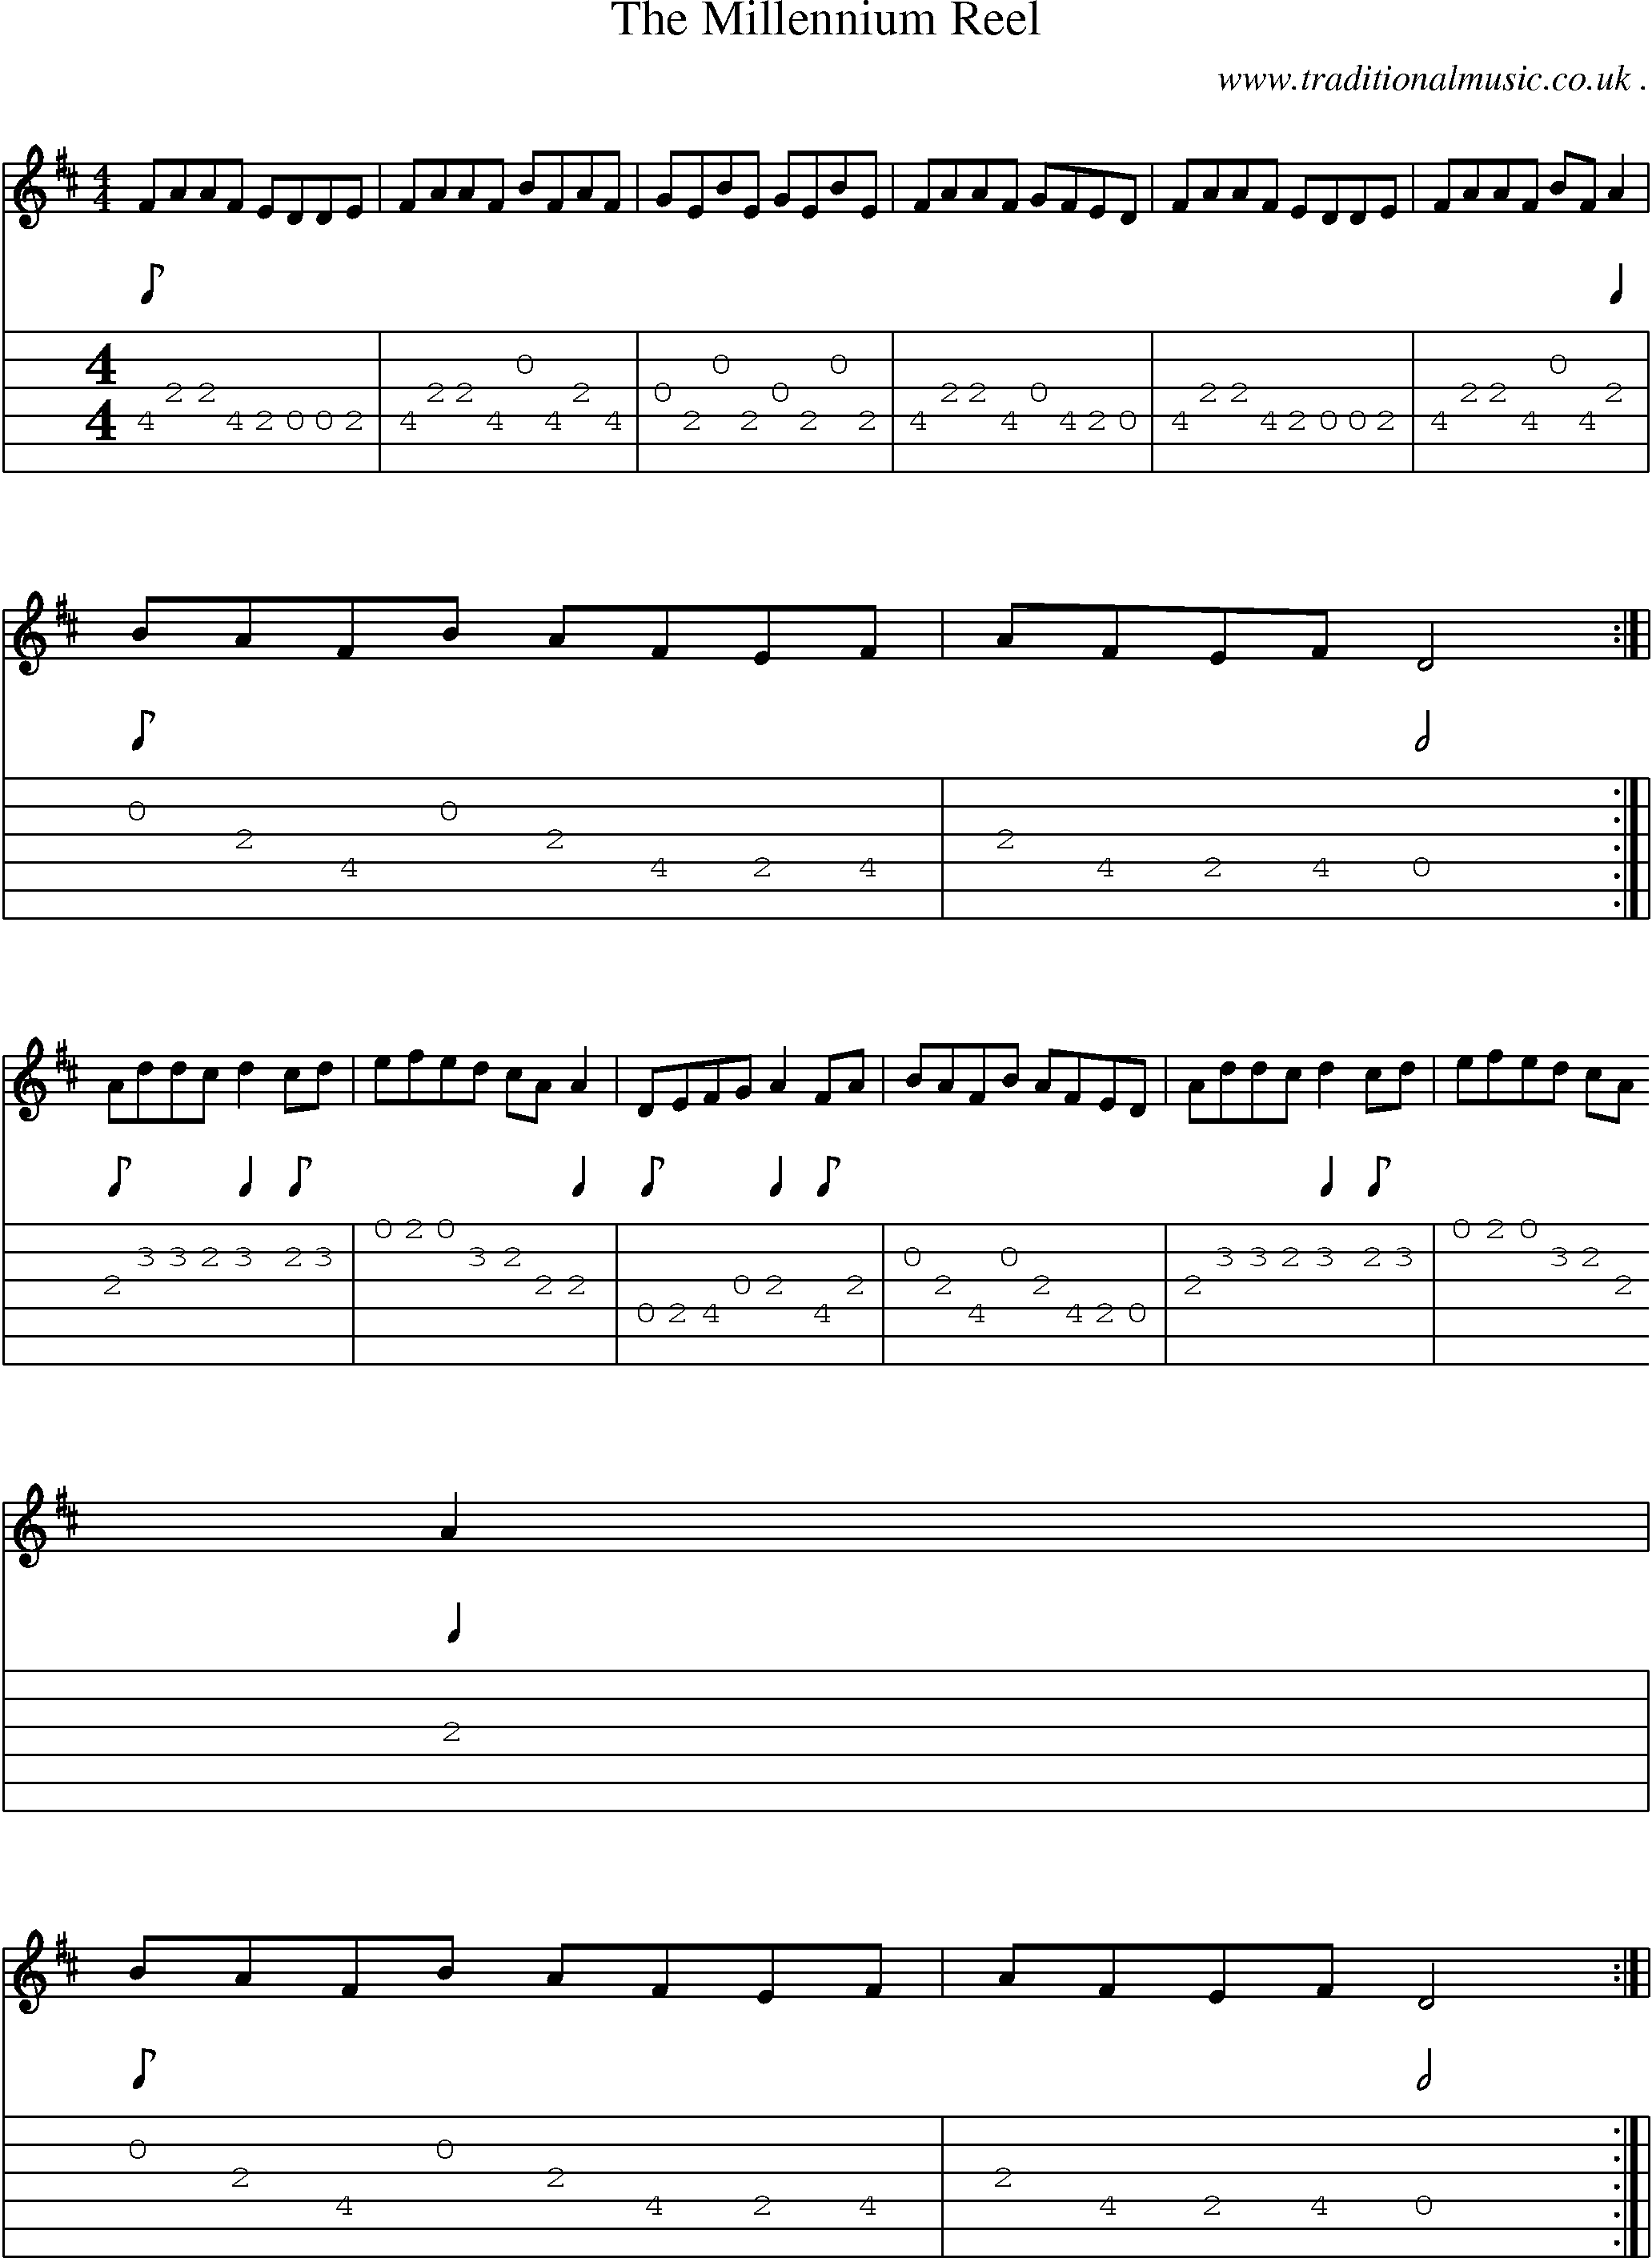 Sheet-Music and Guitar Tabs for The Millennium Reel